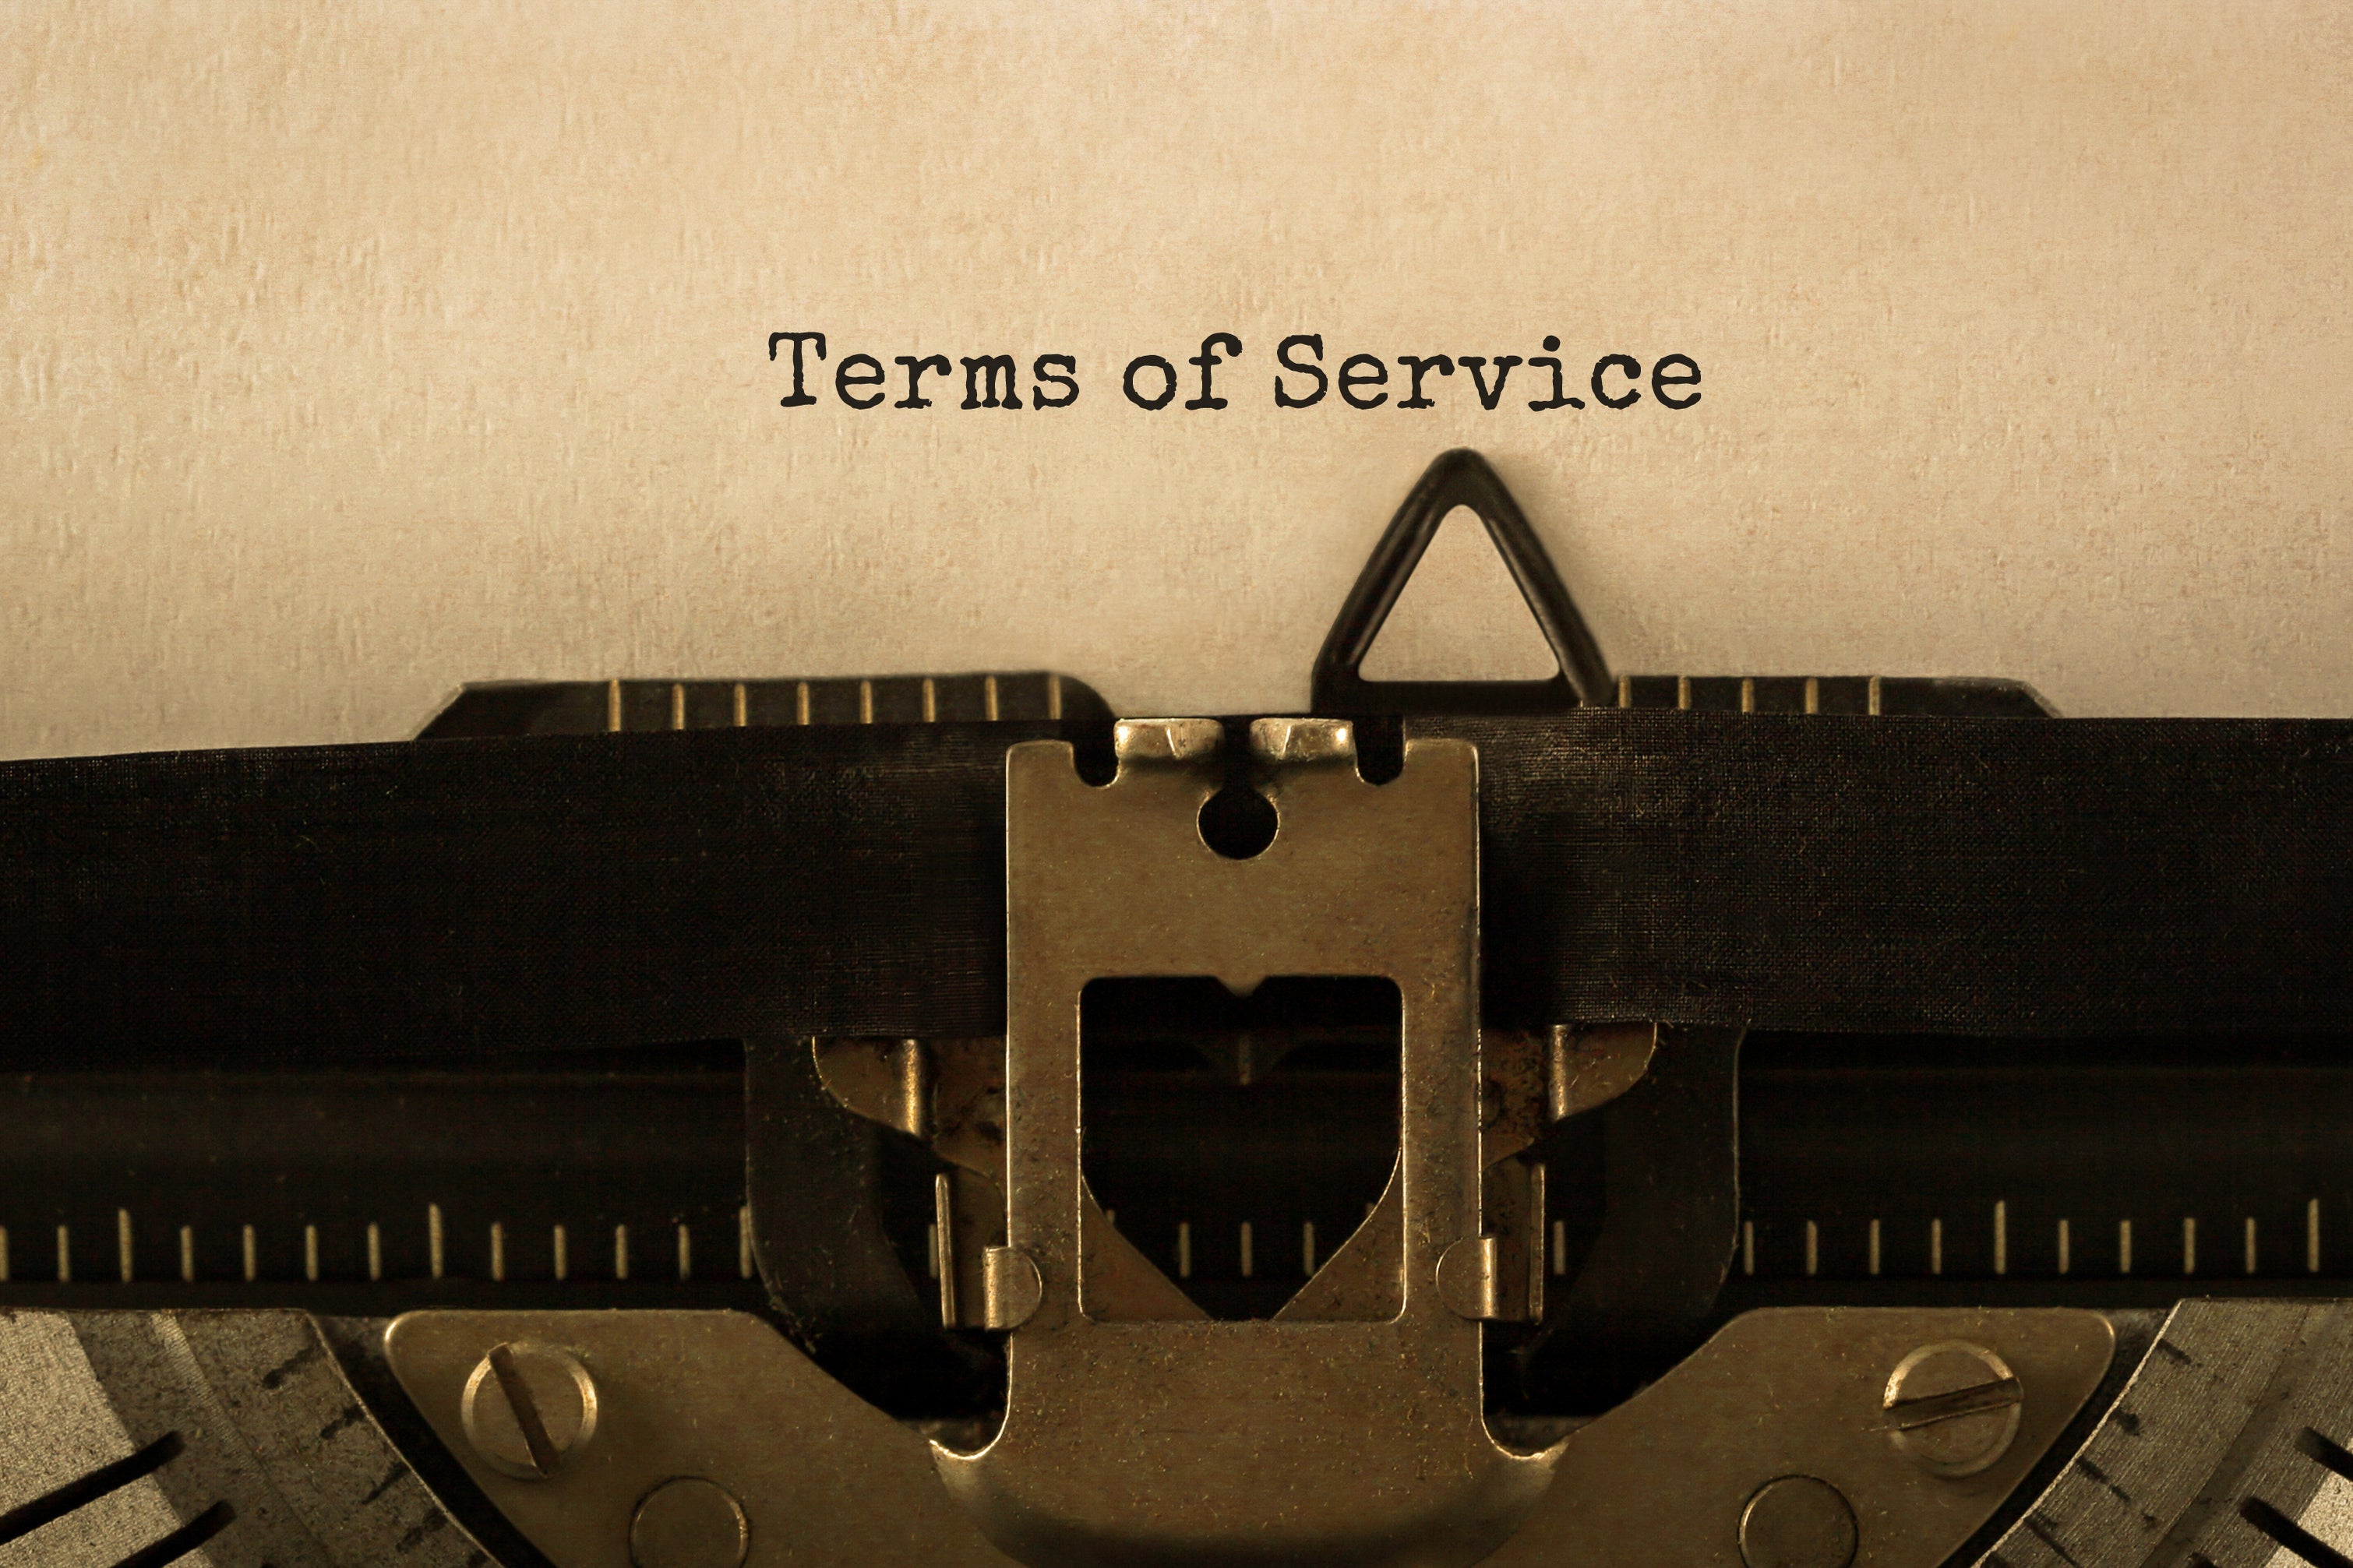 "Terms of service" appears on a typewriter.